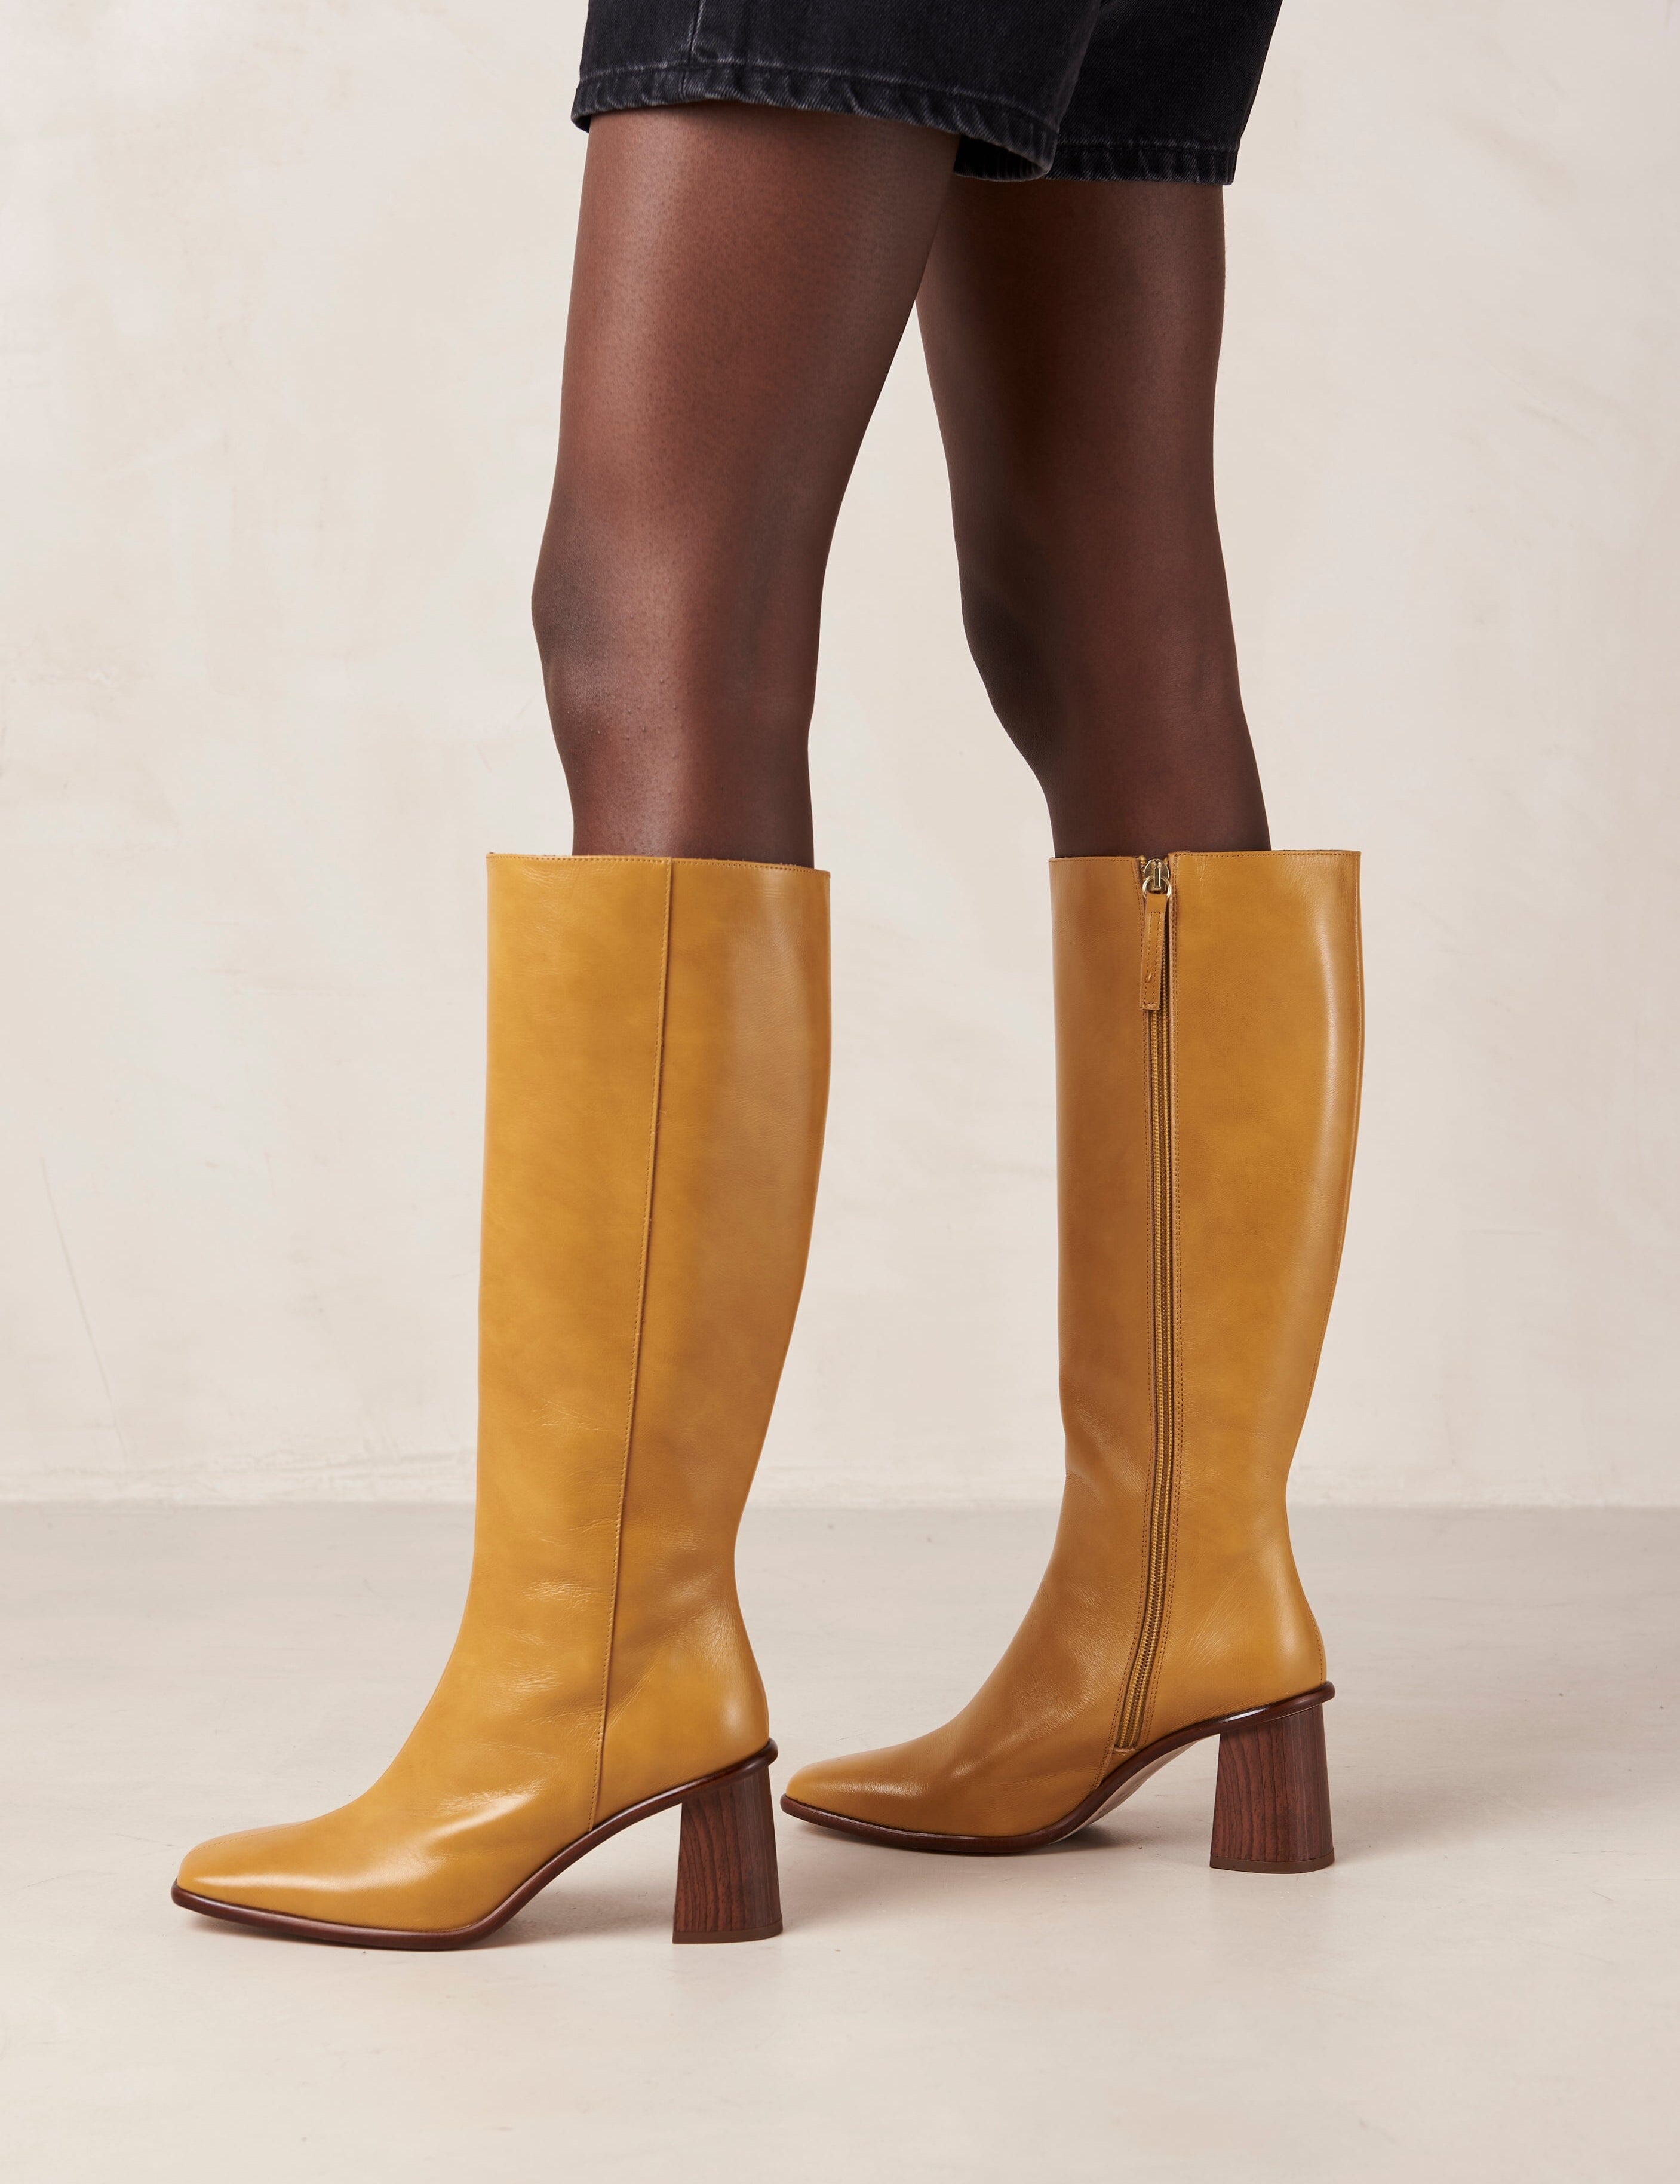 east-marigold-yellow-leather-boots-boots-alohas-381693_3000x_a43581bc-07b3-492f-91cb-ab08ddcd6075.jpg